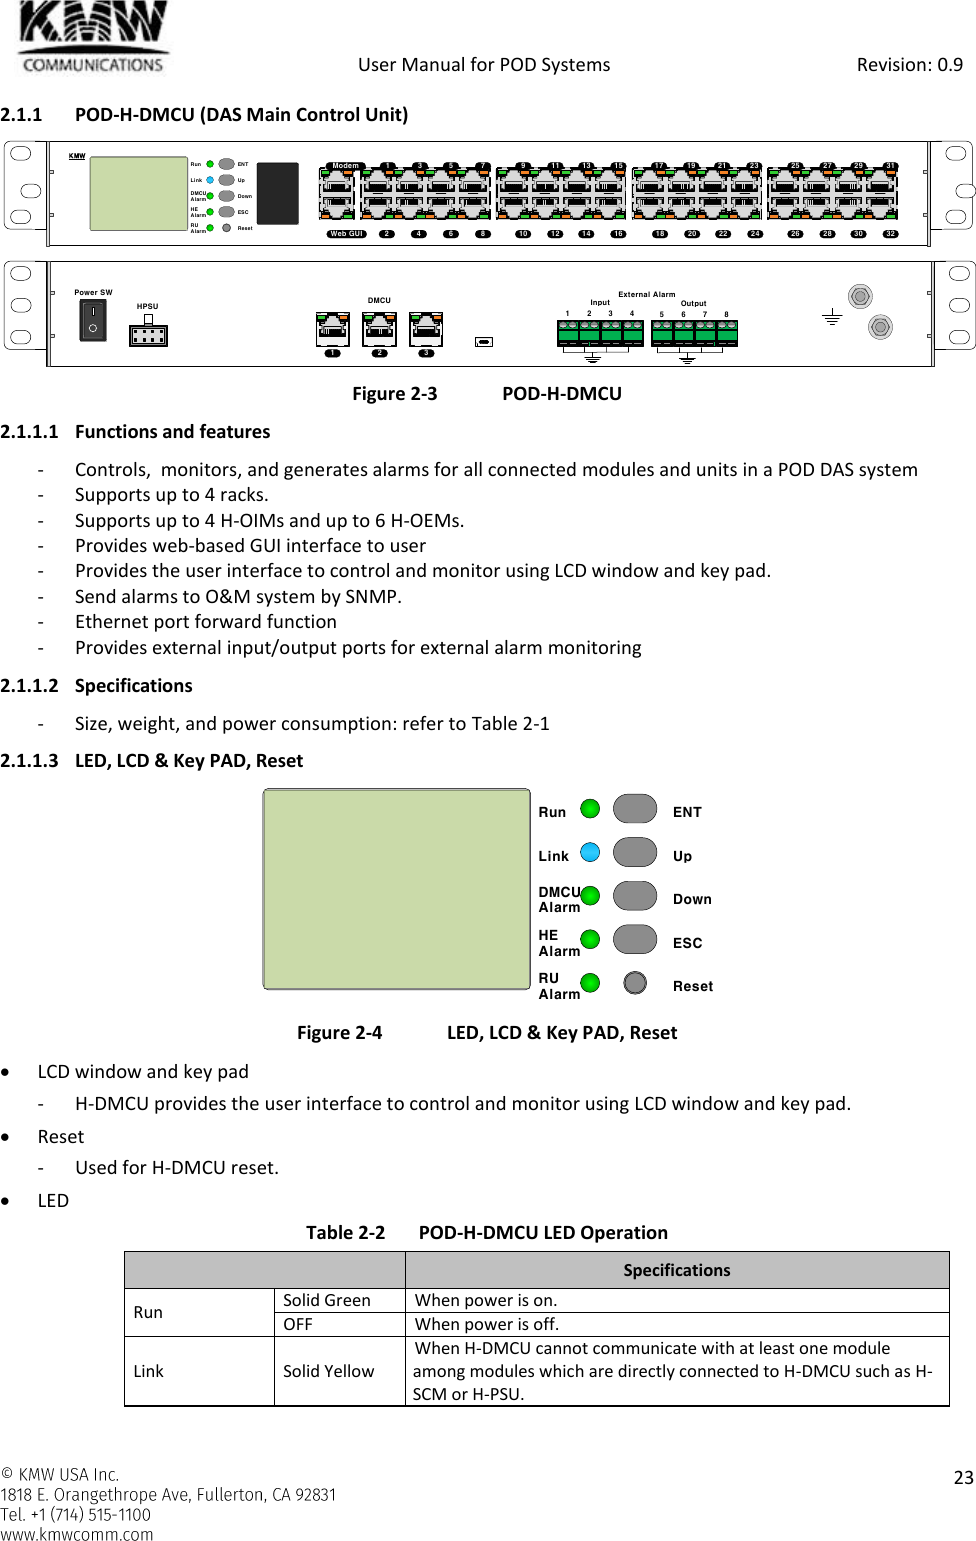            User Manual for POD Systems                                                     Revision: 0.9    23  2.1.1 POD-H-DMCU (DAS Main Control Unit)   Figure 2-3  POD-H-DMCU 2.1.1.1 Functions and features - Controls,  monitors, and generates alarms for all connected modules and units in a POD DAS system - Supports up to 4 racks. - Supports up to 4 H-OIMs and up to 6 H-OEMs. - Provides web-based GUI interface to user - Provides the user interface to control and monitor using LCD window and key pad. - Send alarms to O&amp;M system by SNMP. - Ethernet port forward function - Provides external input/output ports for external alarm monitoring 2.1.1.2 Specifications - Size, weight, and power consumption: refer to Table 2-1 2.1.1.3 LED, LCD &amp; Key PAD, Reset  Figure 2-4  LED, LCD &amp; Key PAD, Reset  LCD window and key pad - H-DMCU provides the user interface to control and monitor using LCD window and key pad.  Reset - Used for H-DMCU reset.  LED Table 2-2  POD-H-DMCU LED Operation  Specifications Run Solid Green When power is on. OFF When power is off. Link Solid Yellow When H-DMCU cannot communicate with at least one module among modules which are directly connected to H-DMCU such as H-SCM or H-PSU. ENTUpDownESCResetRunDMCUAlarmLinkHEAlarmRUAlarm12345 76 89 11 13 1510 12 14 1617 19 21 2318 20 22 2425 27 29 3126 28 30 32ModemWeb GUIKMWHPSUPower SWDMCU1 2 3External AlarmInput Output1 2 3 4 5 6 7 8ENTUpDownESCResetRunDMCUAlarmLinkHEAlarmRUAlarm